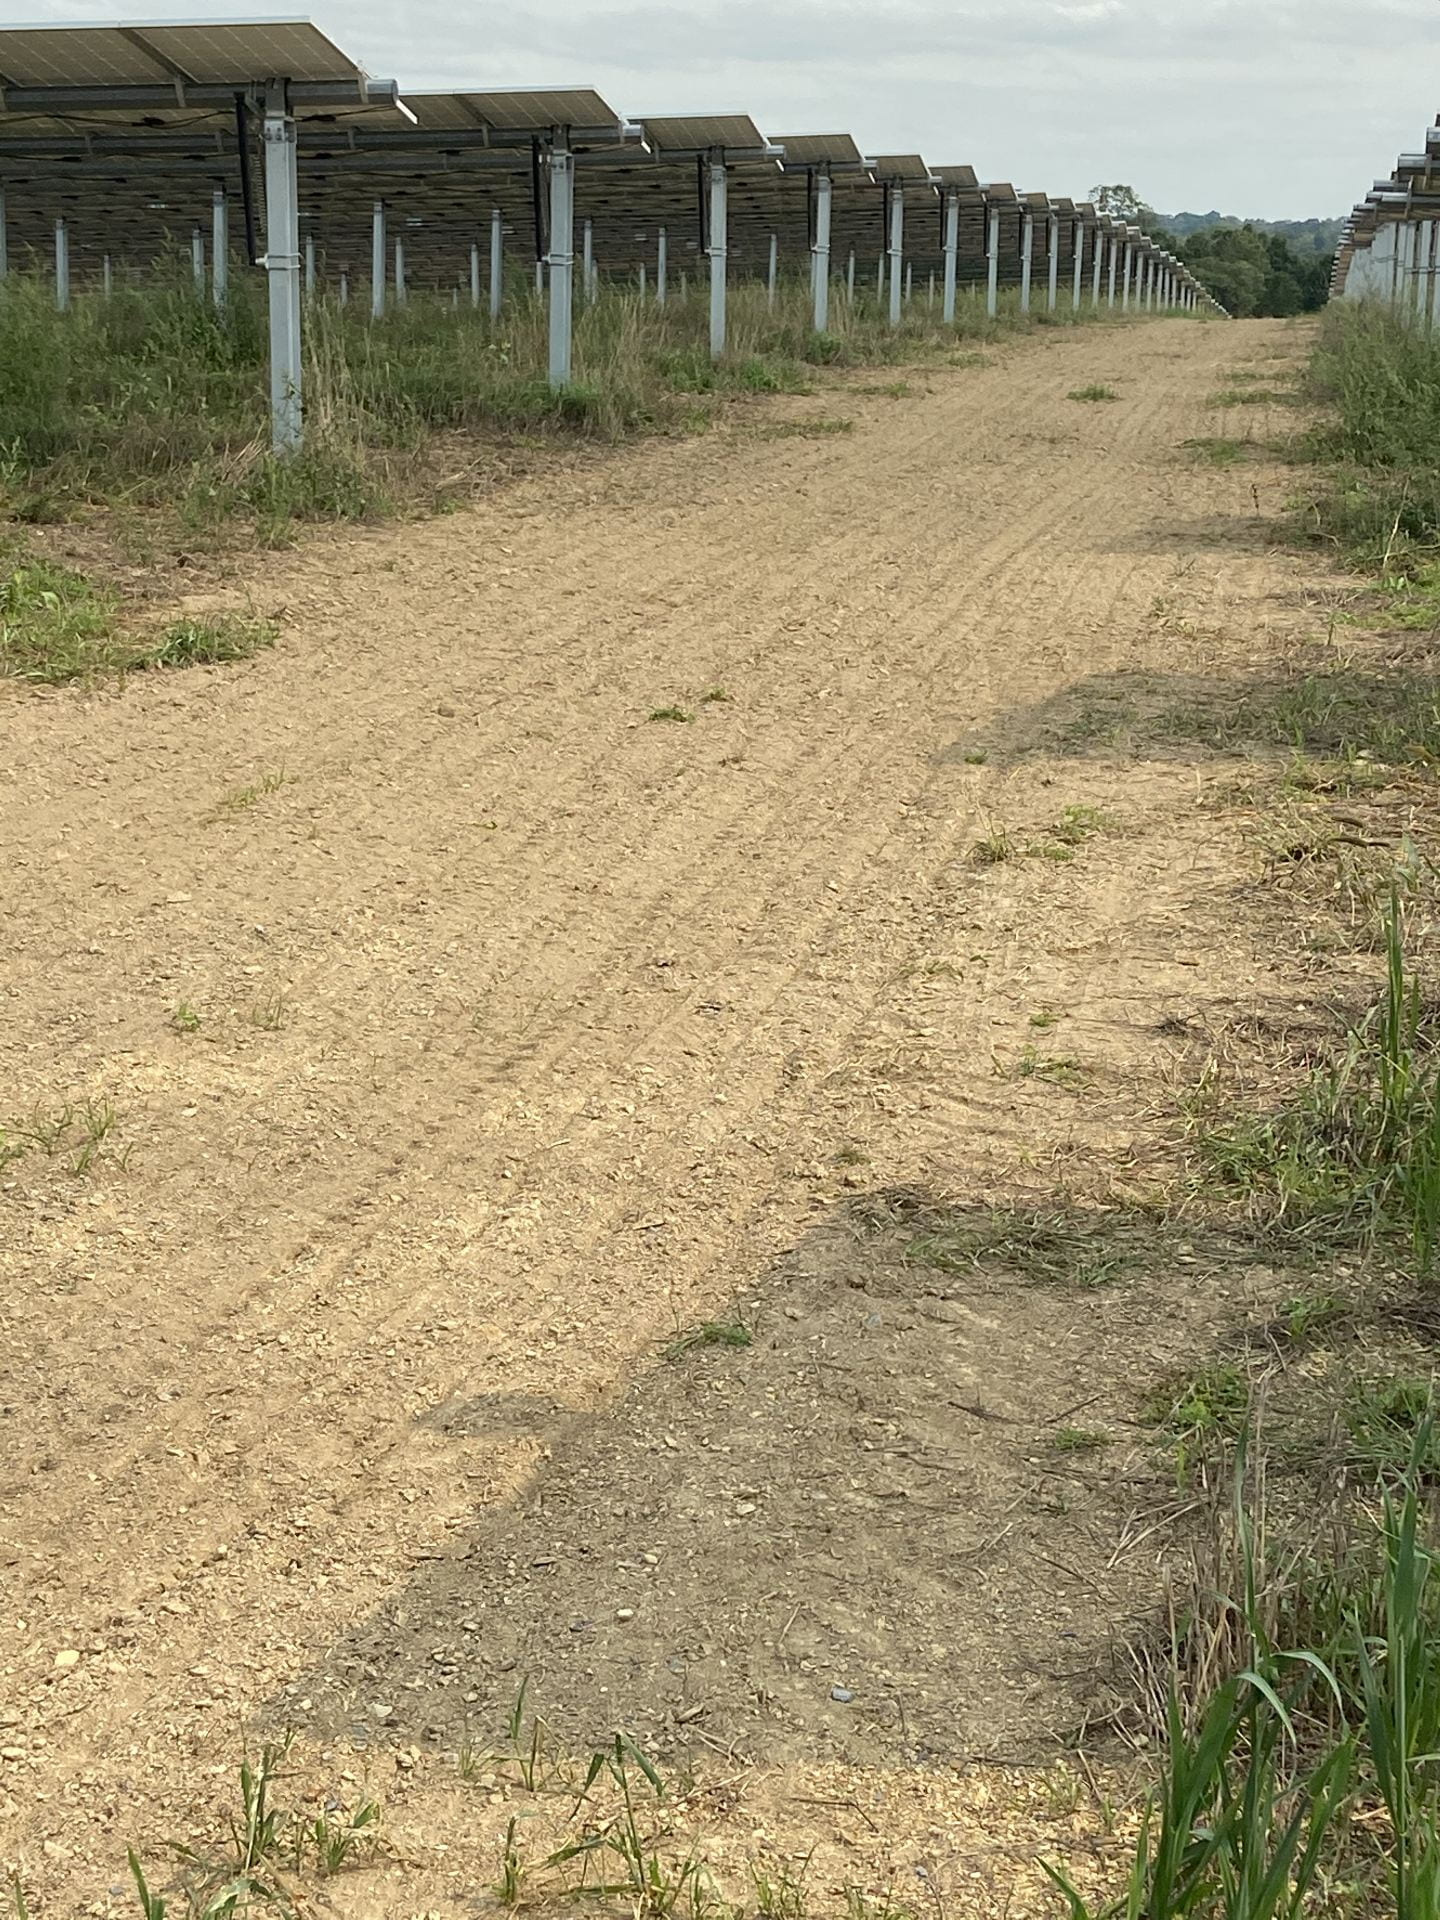 This access road has been planted with grass. Credit: Penn State MCOR